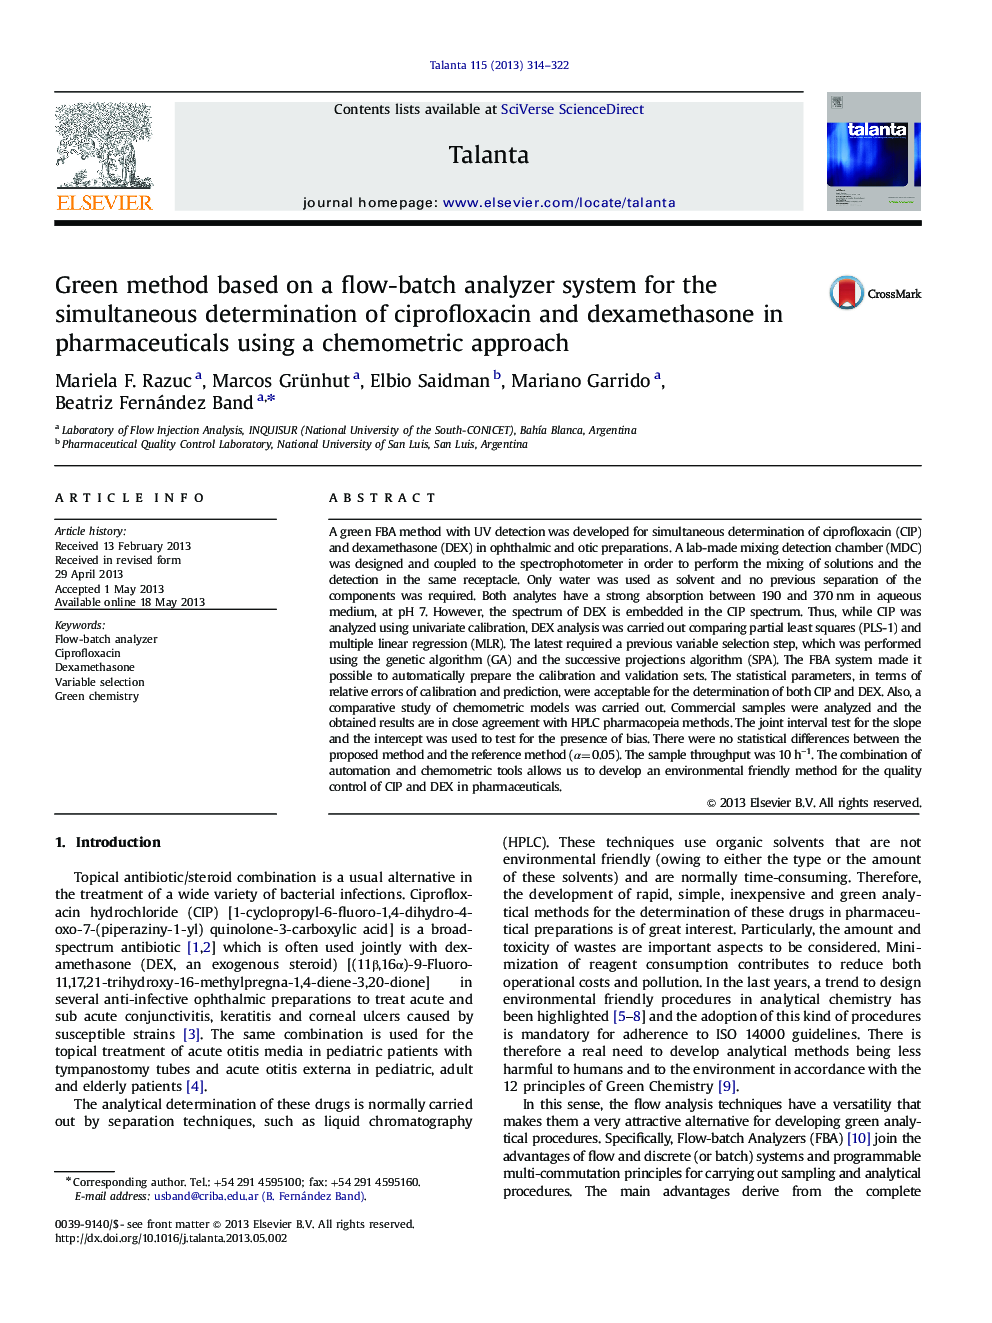 Green method based on a flow-batch analyzer system for the simultaneous determination of ciprofloxacin and dexamethasone in pharmaceuticals using a chemometric approach